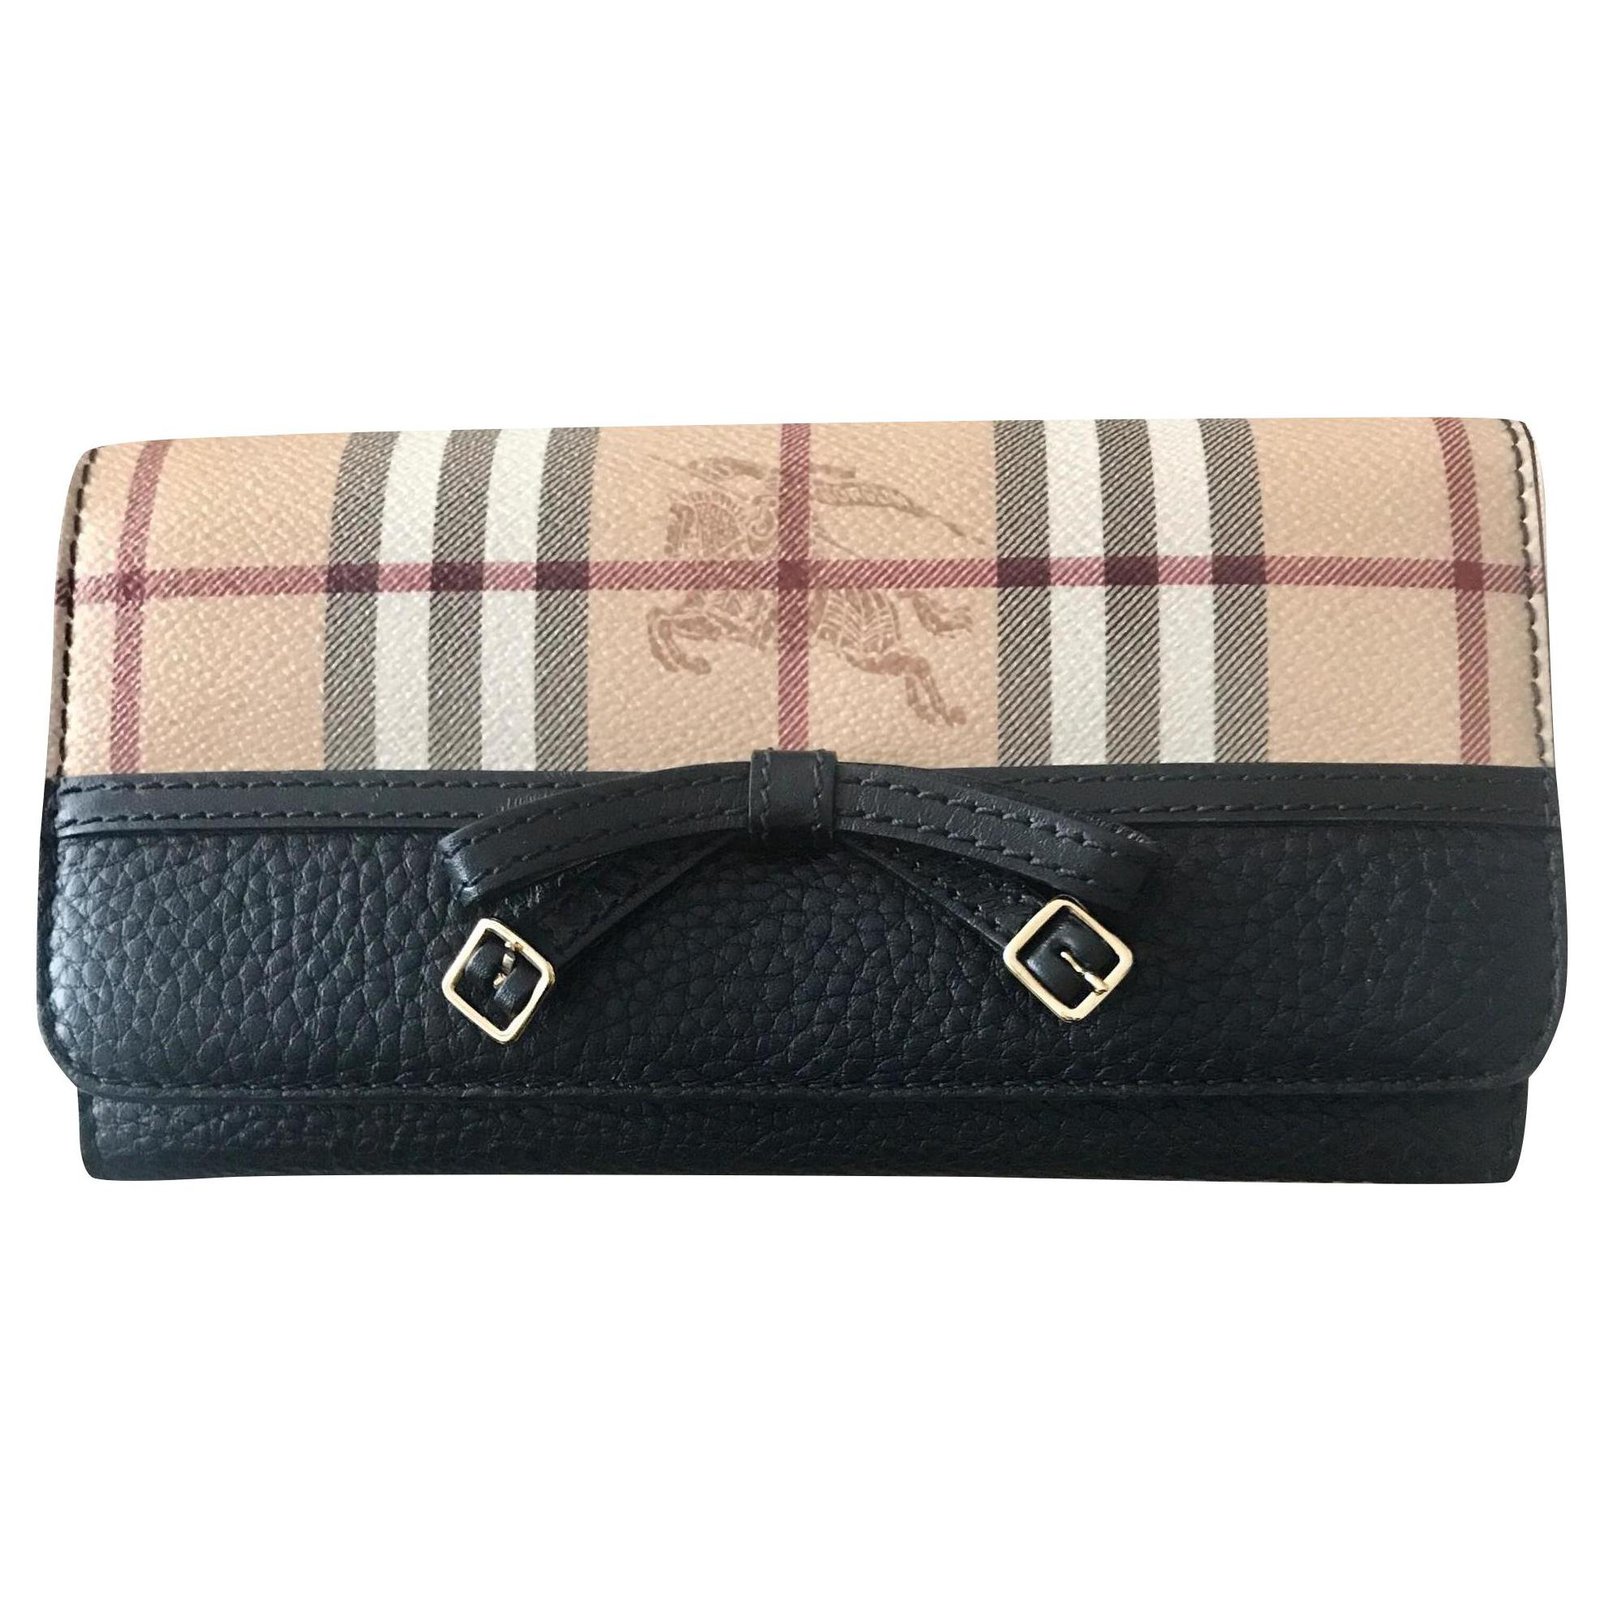 burberry wallet quality